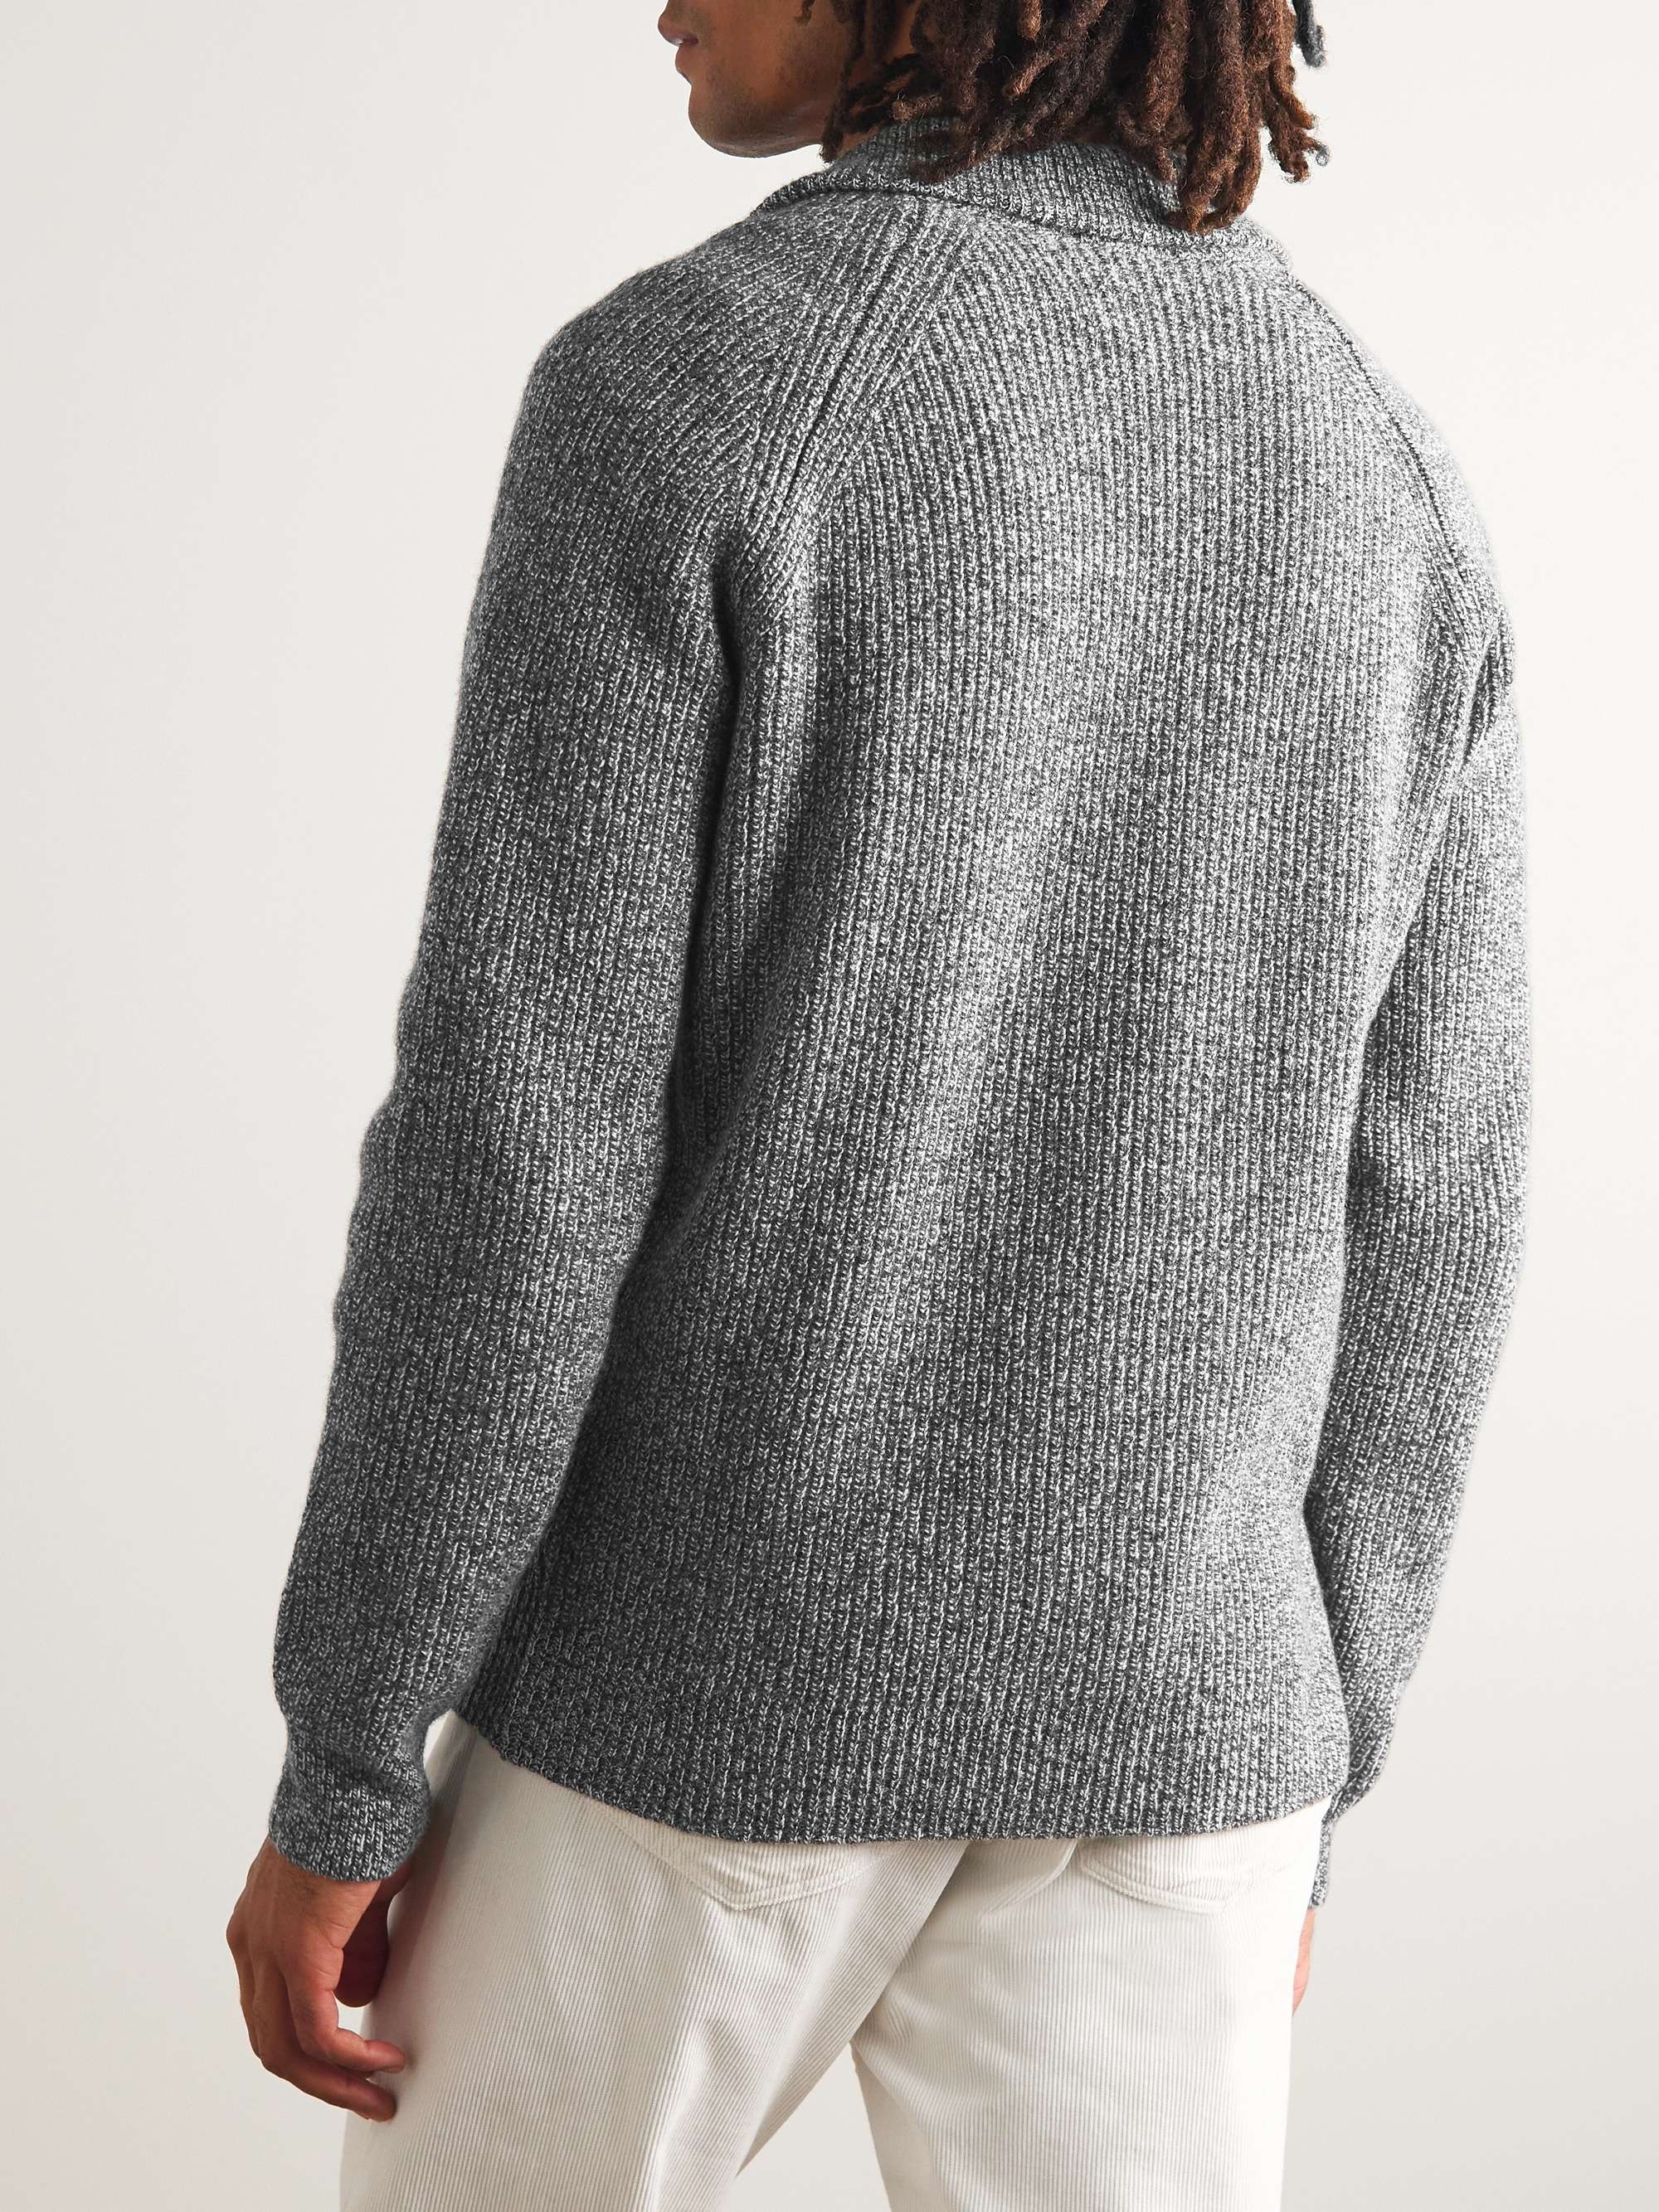 JOHN SMEDLEY Thatch Recycled Cashmere and Merino Wool-Blend Zip-Up Cardigan